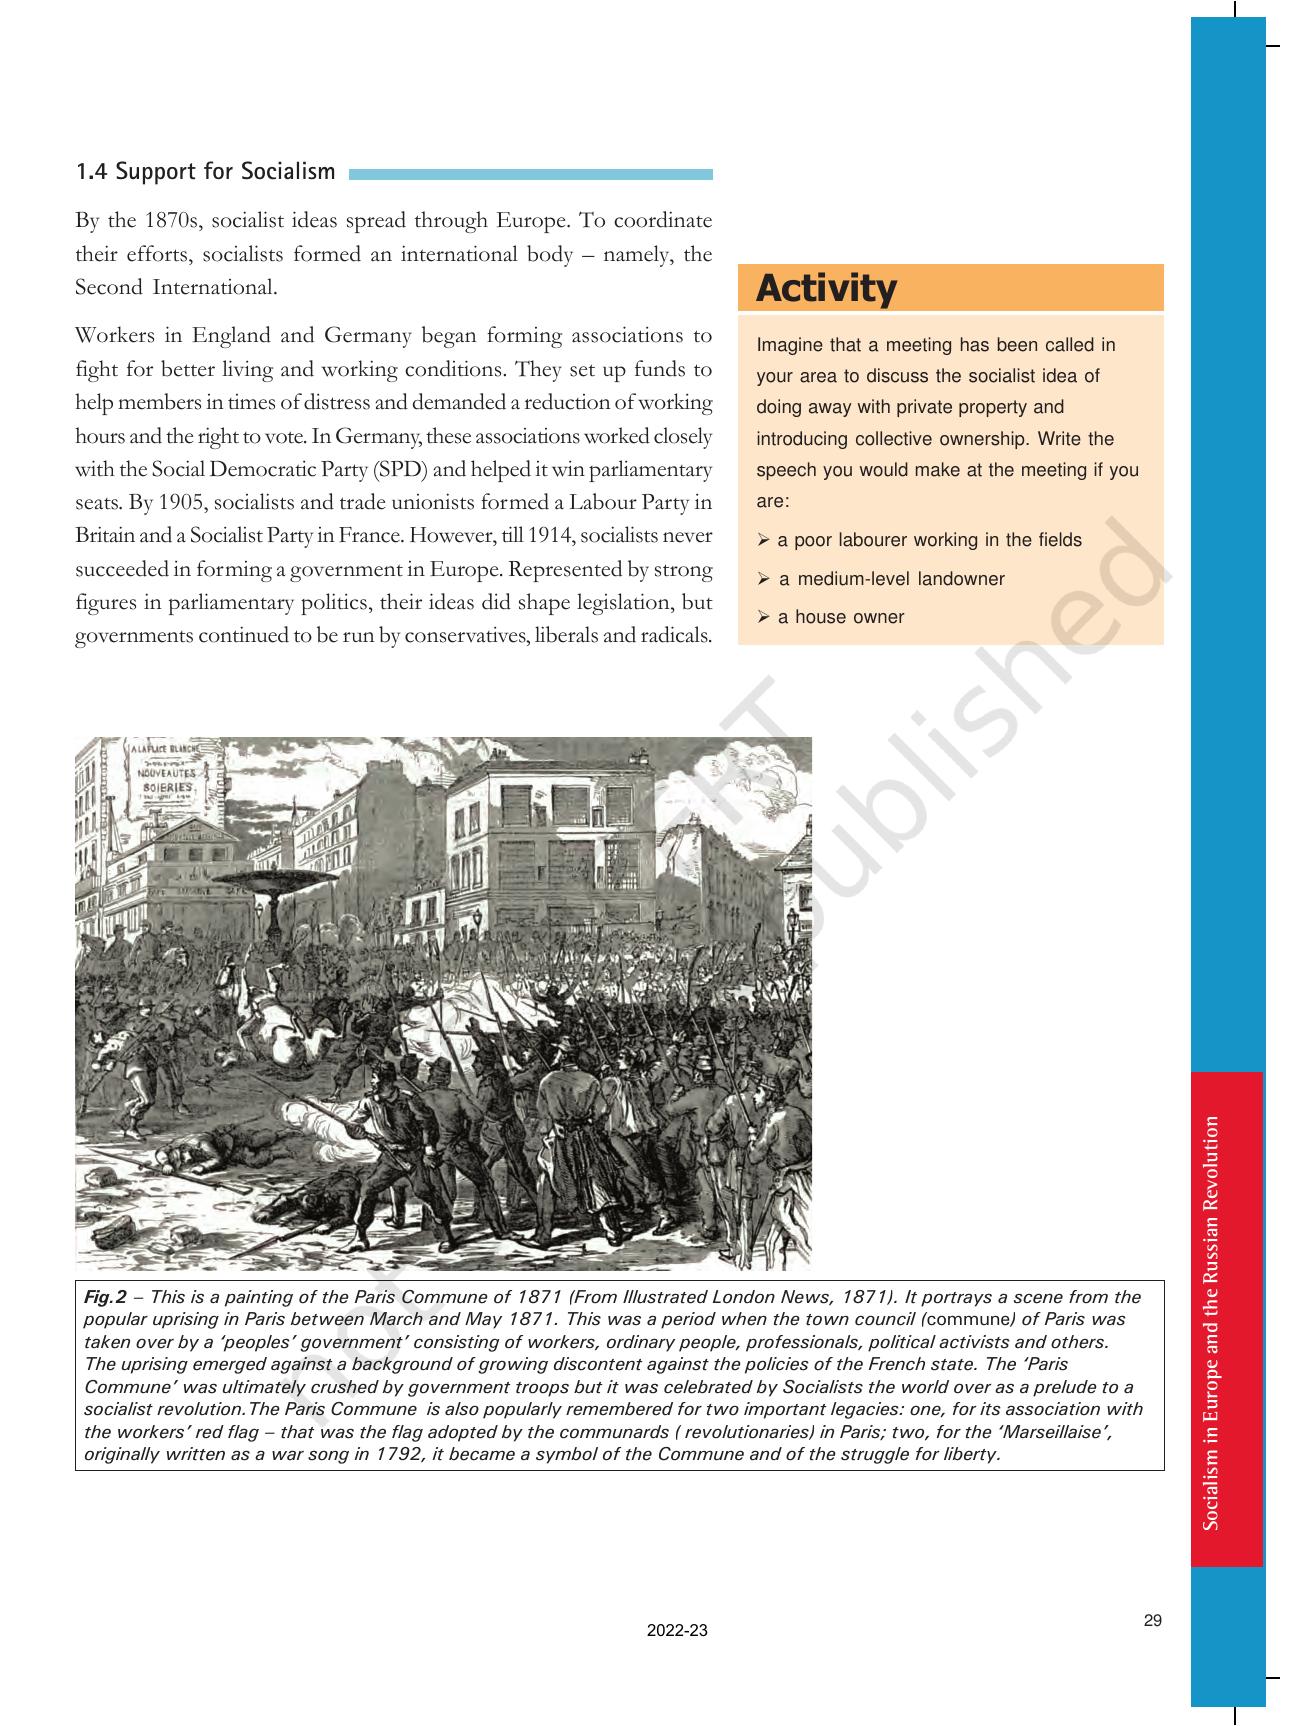 NCERT Book for Class 9 History Chapter 2 Socialism in Europe and the Russian Revolution - Page 5